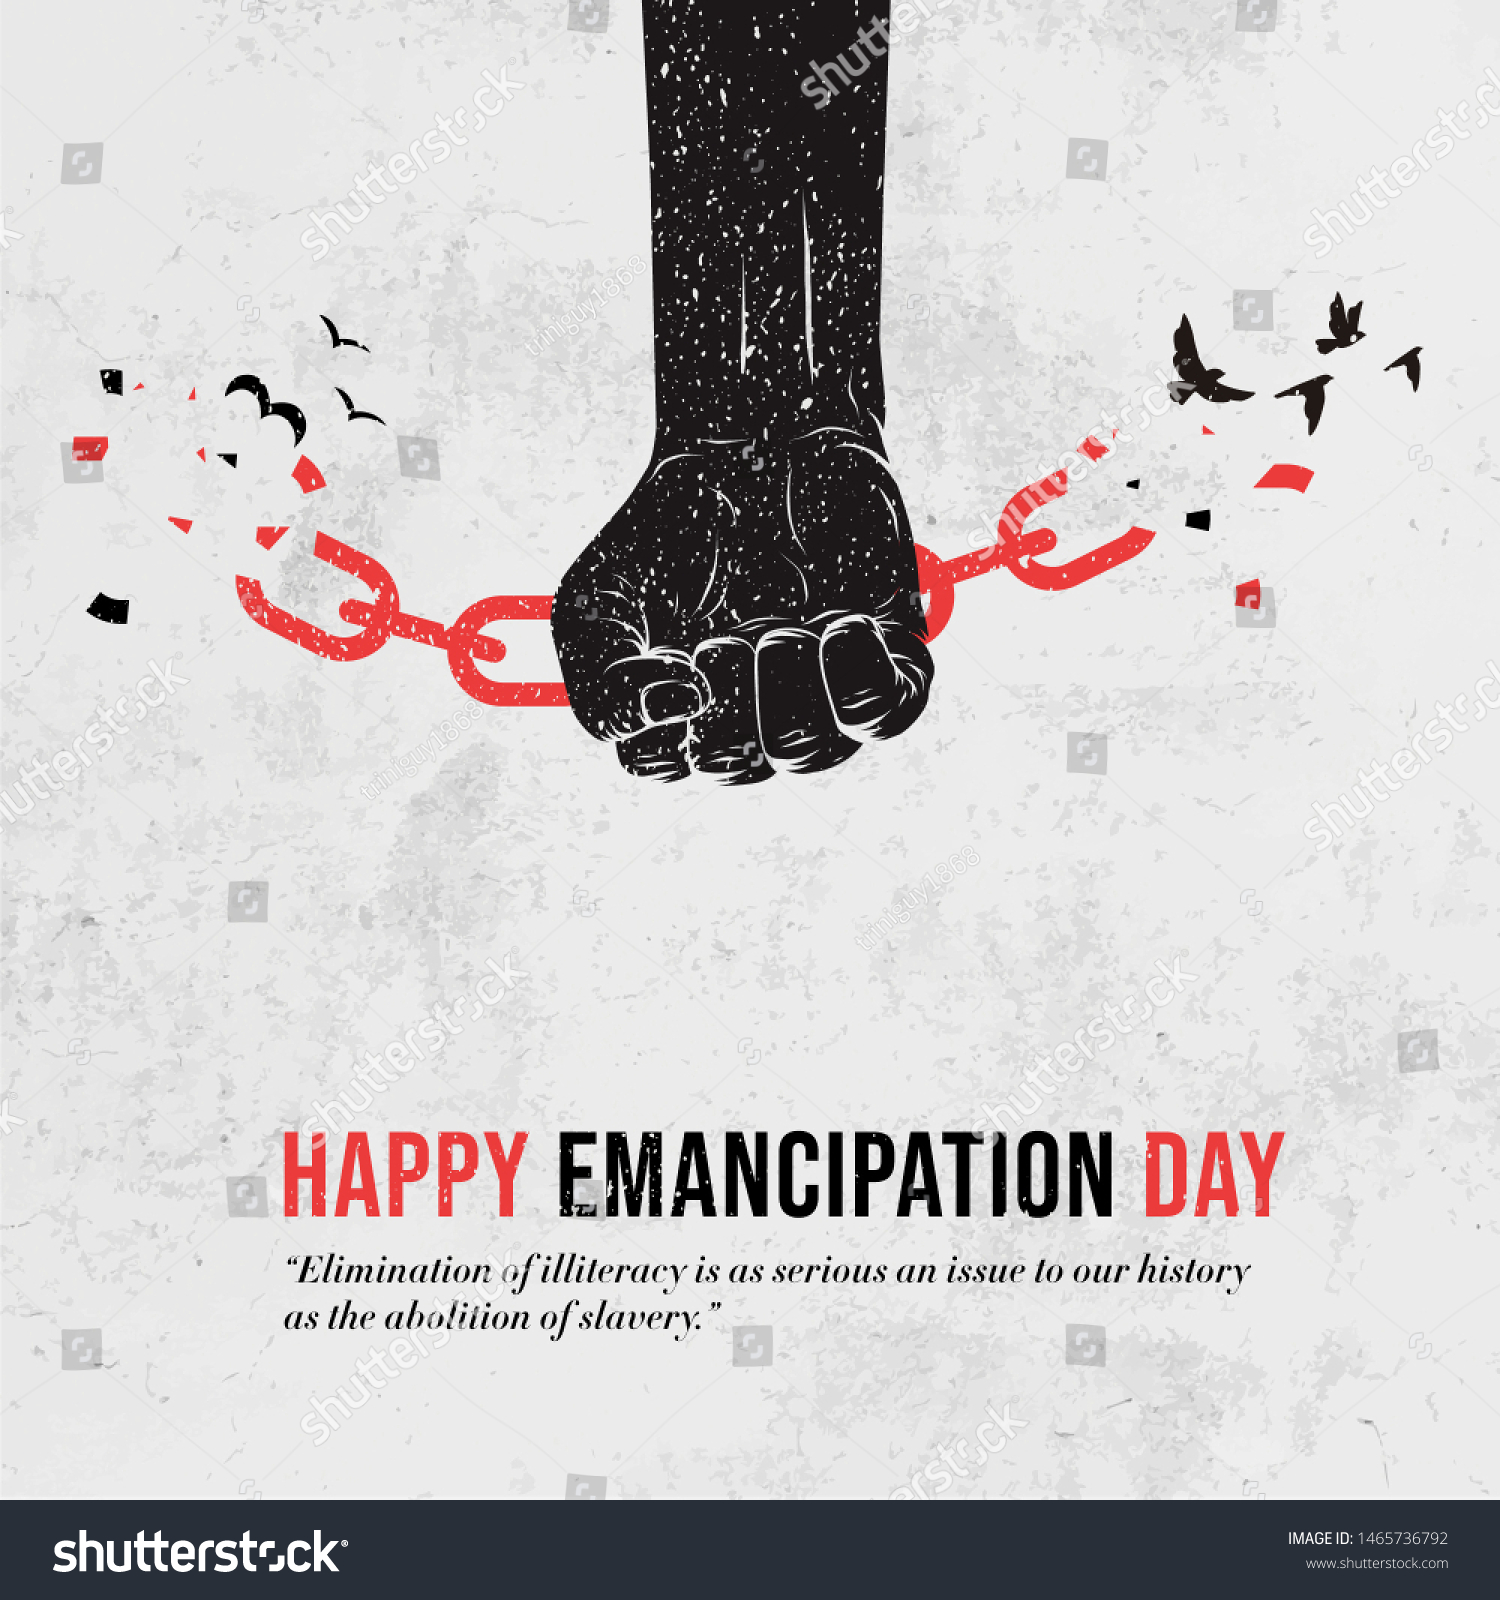 Emancipation Day, Human hand and broken chain with the bird symbols, Freedom Day, Vector illustration, Juneteenth Day, Liberation Day #1465736792